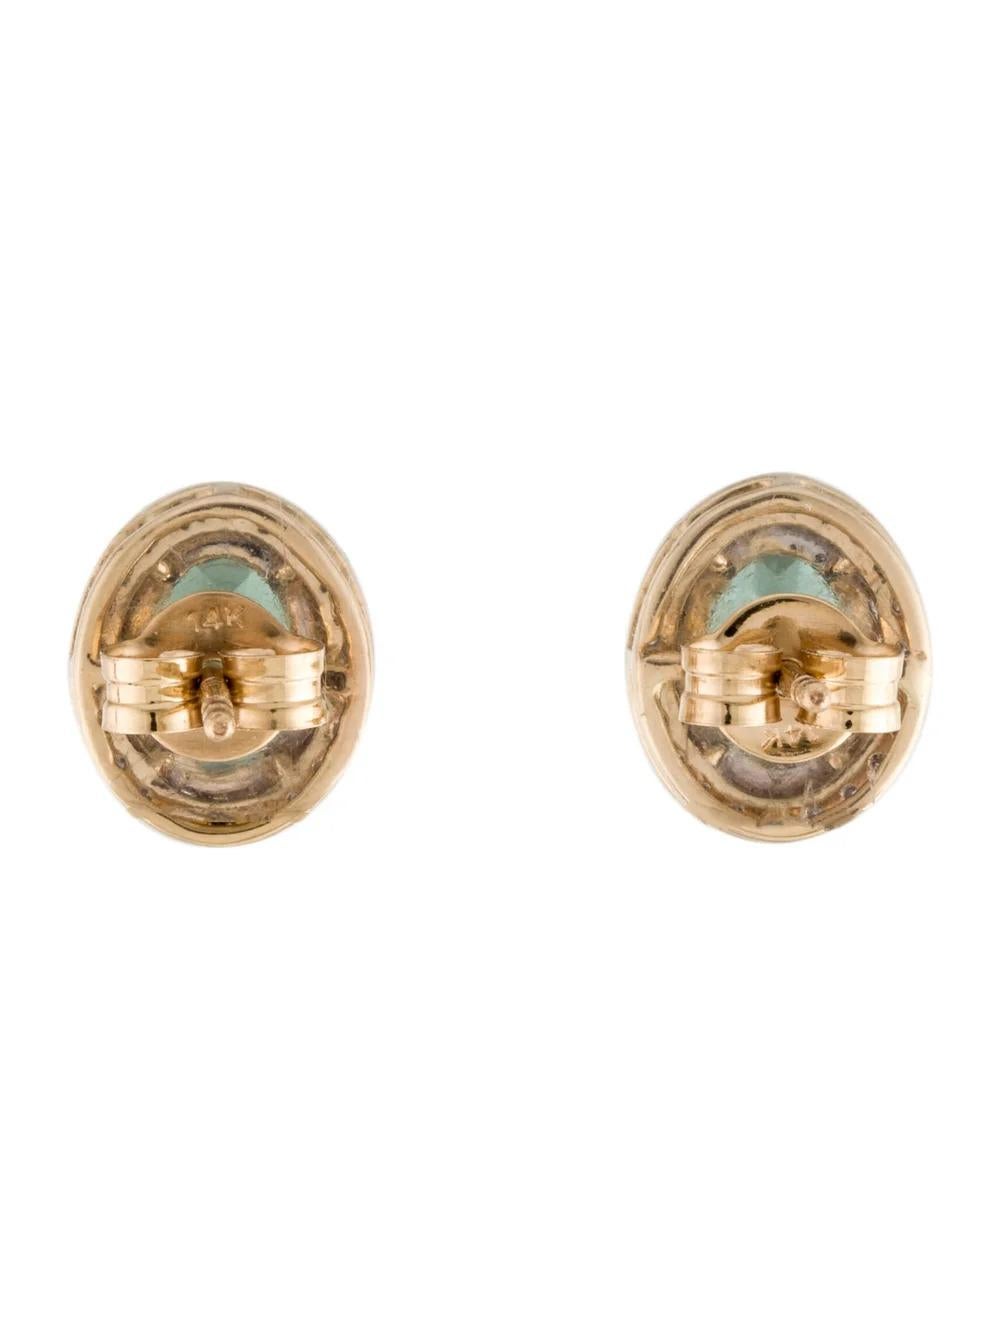 14K Tourmaline Diamond Halo Stud Earrings 1.91ctw - Fine Jewelry Green Gemstone In New Condition For Sale In Holtsville, NY